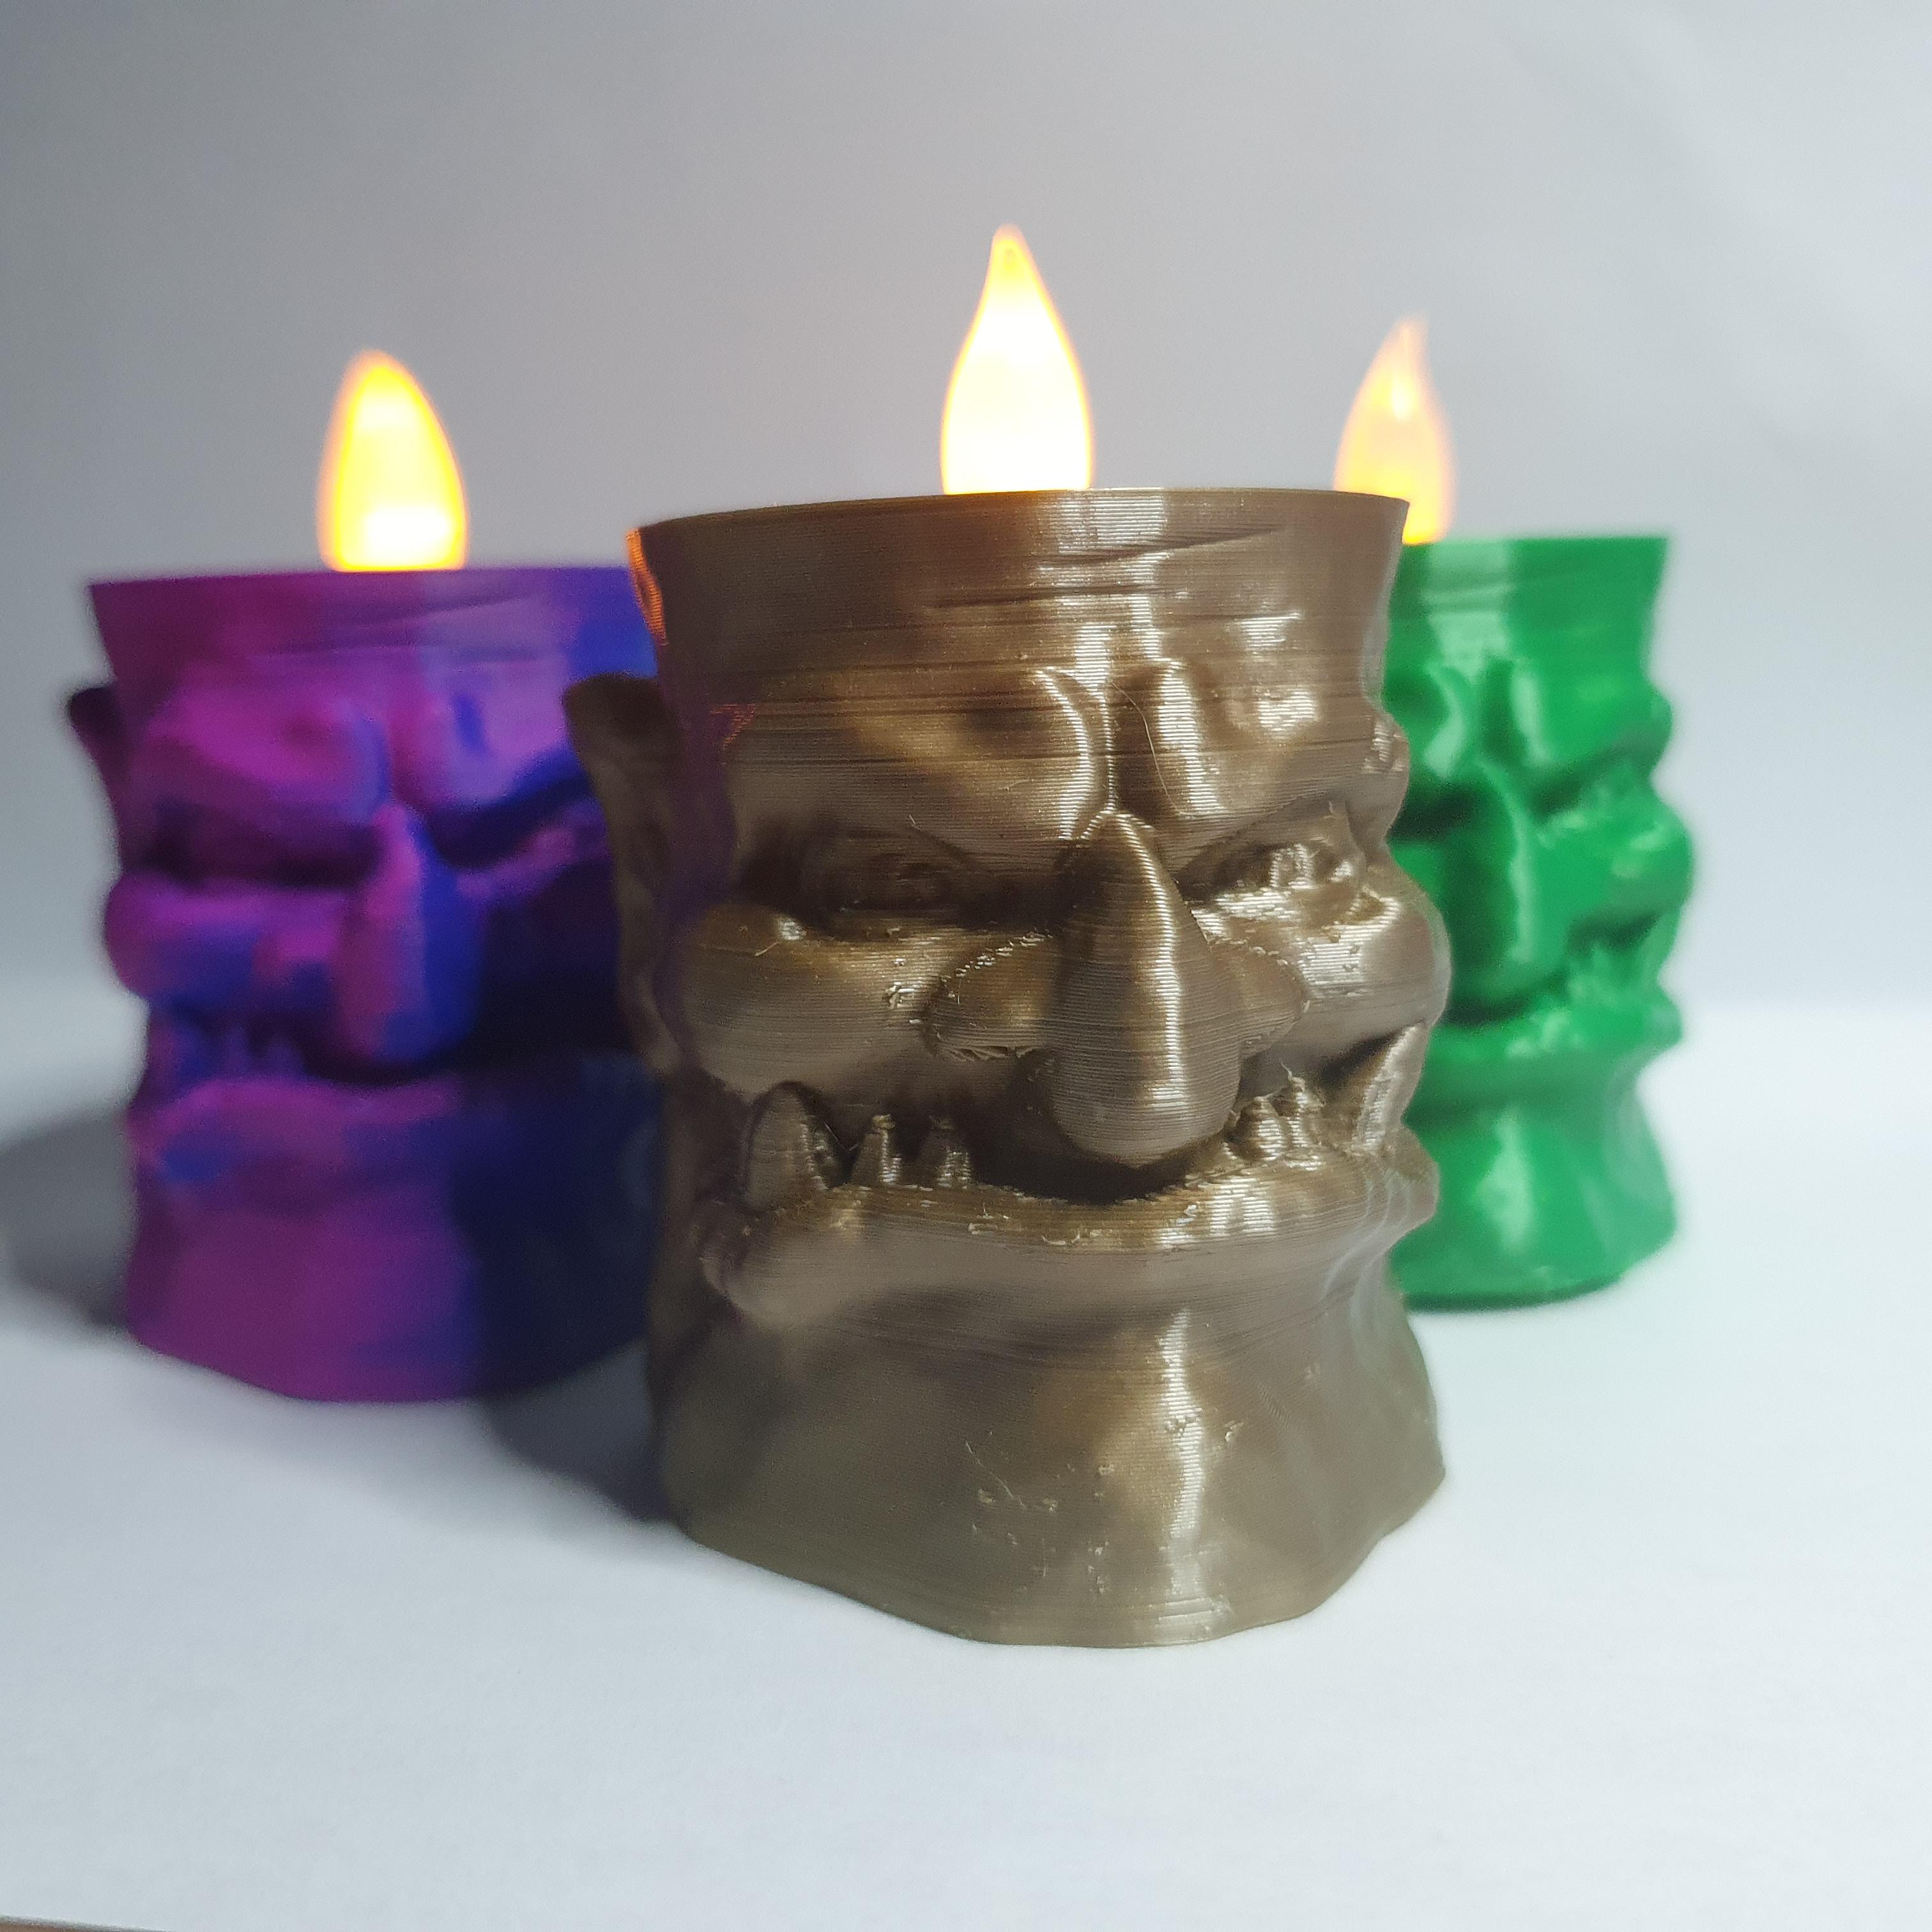 Ogre Can Koozie - Cursed Can Koozie and Tealight Holder  3d model